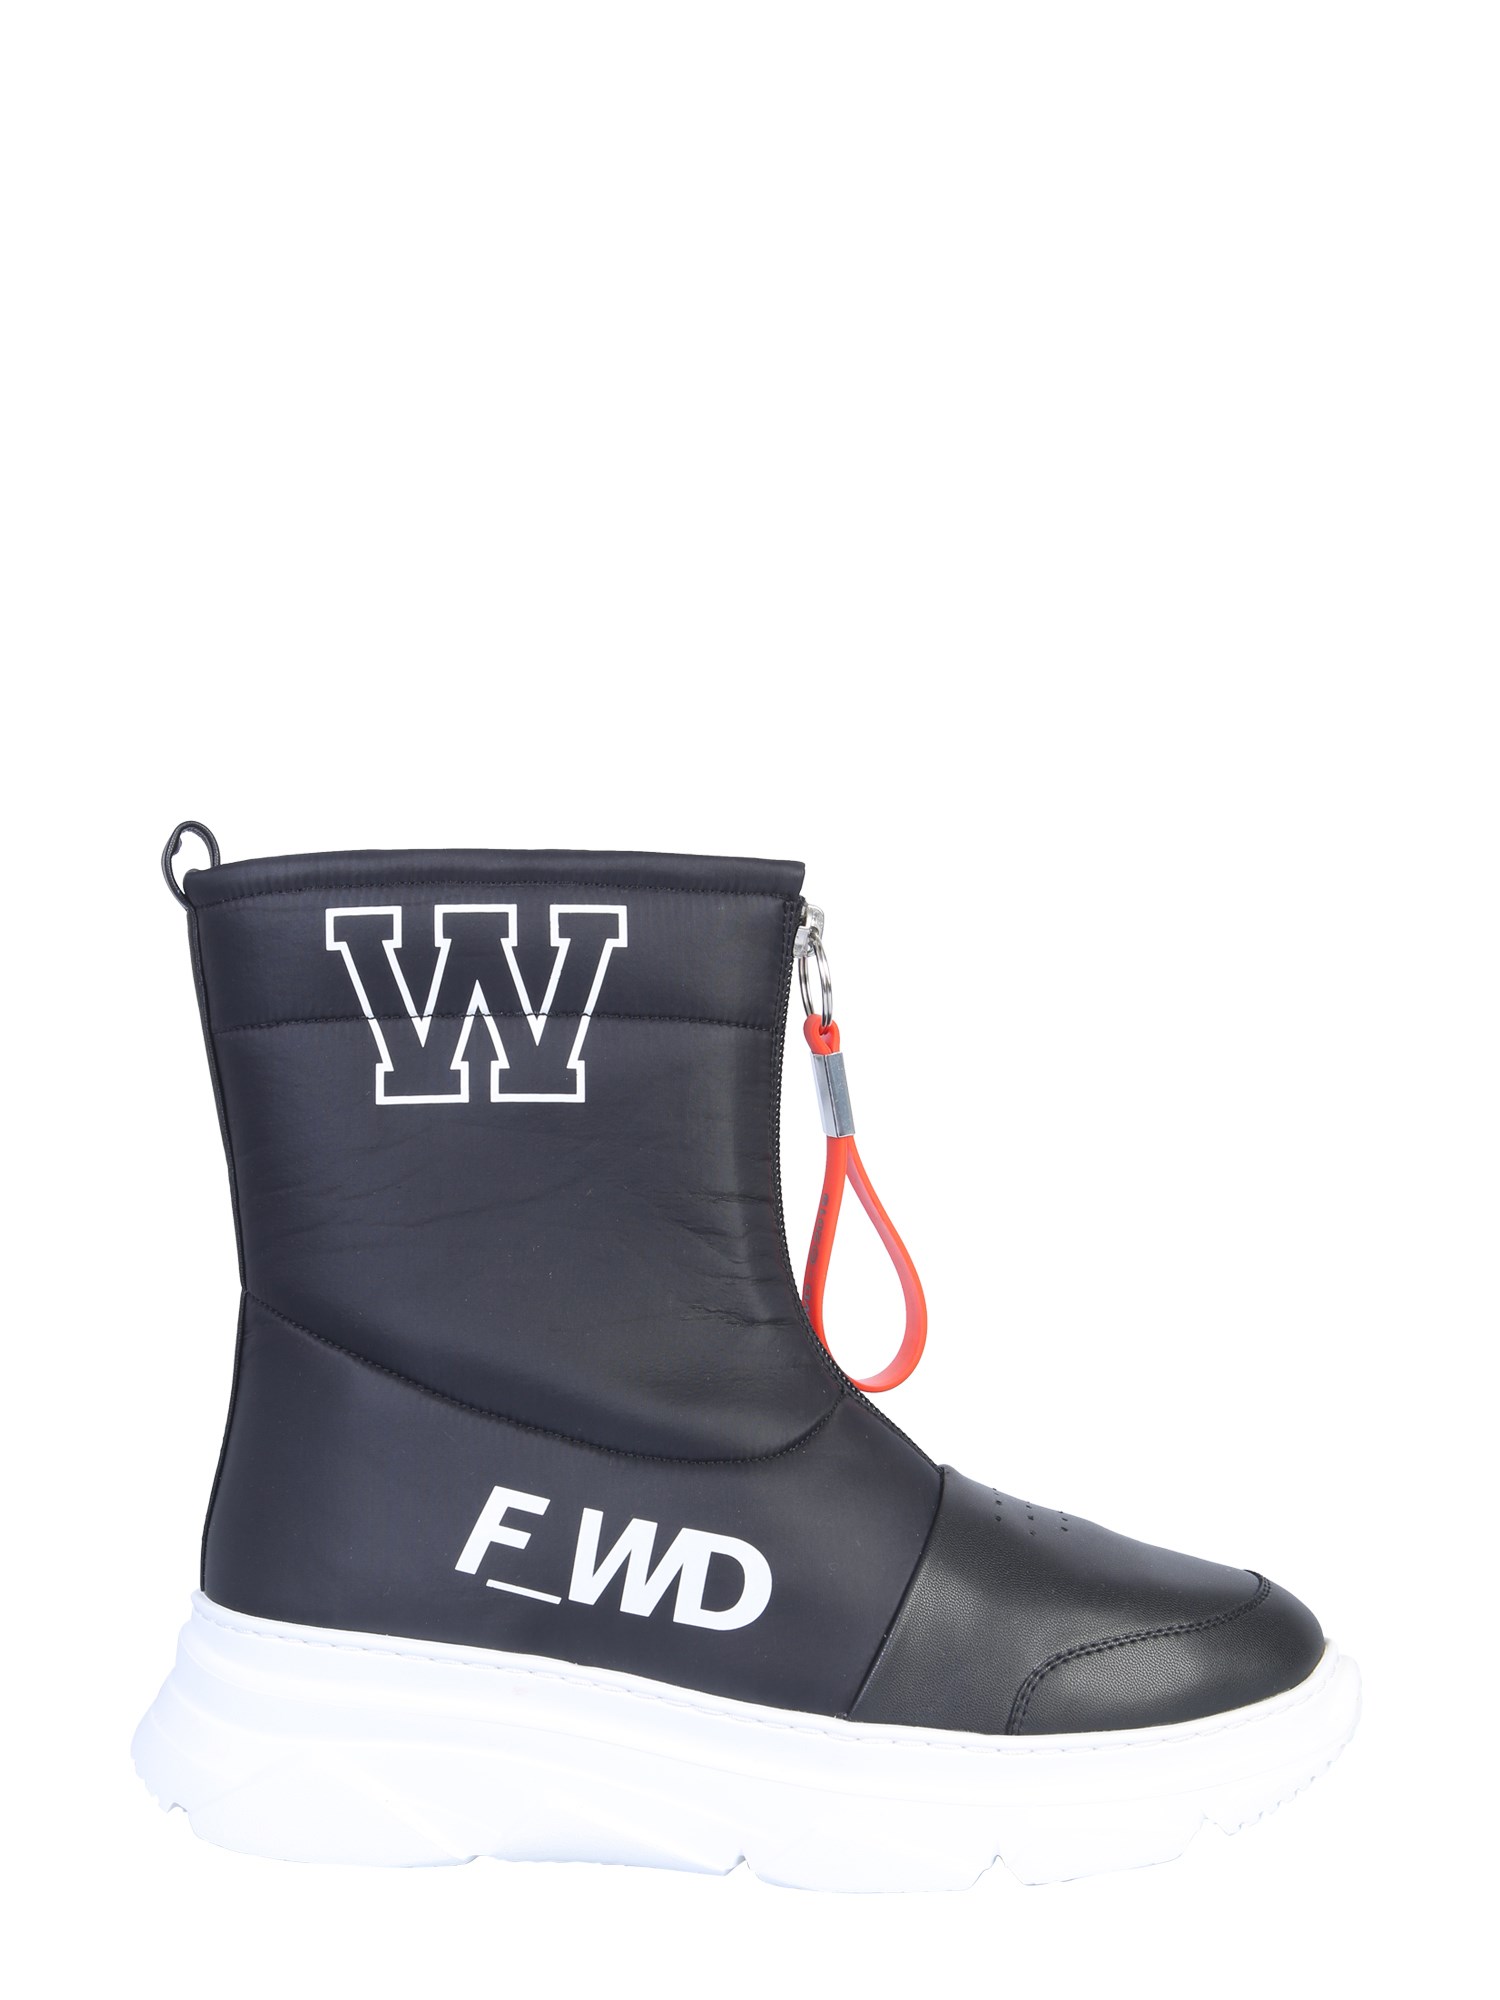 forward leather boot